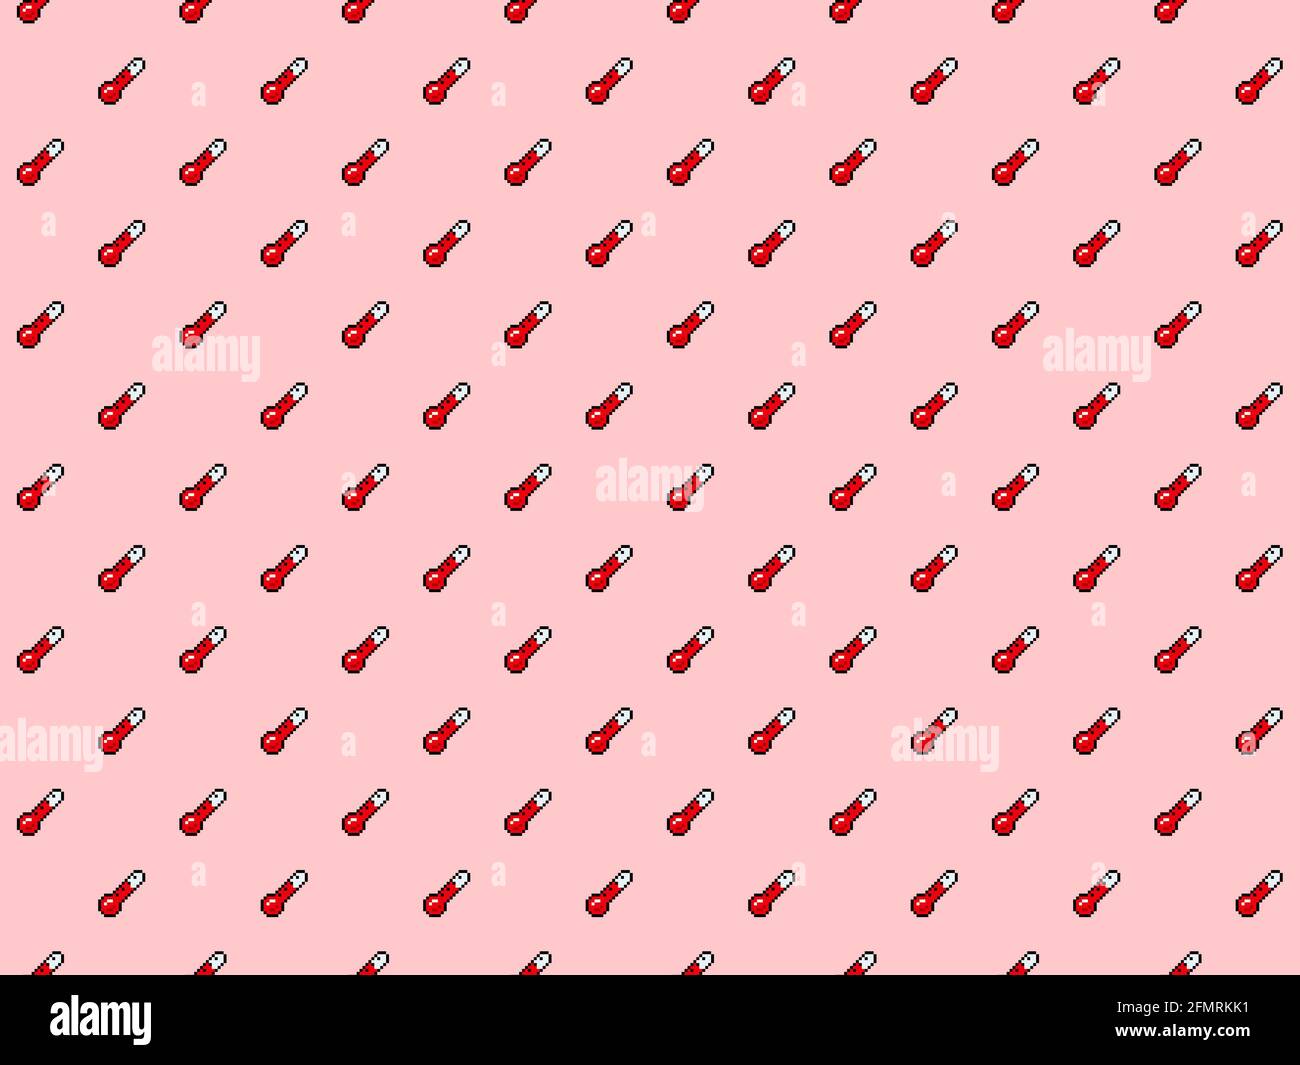 Pixel thermometer background - high-res seamless pattern Stock Photo